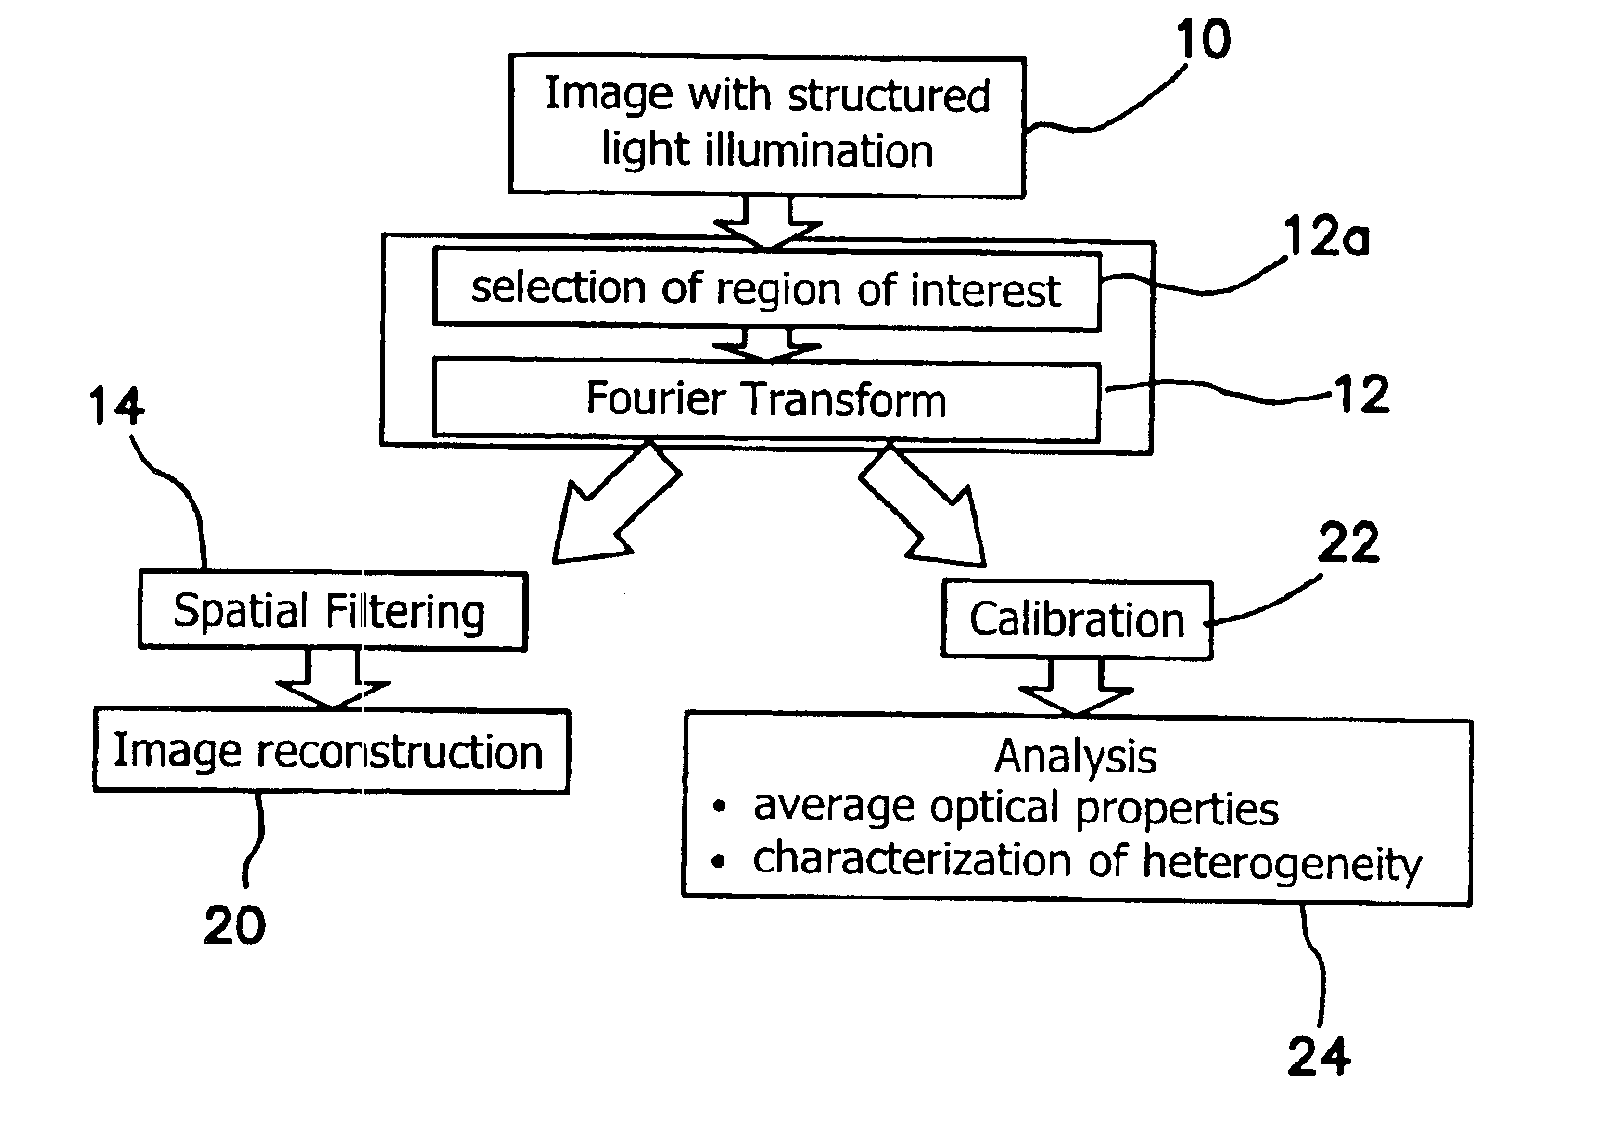 Method and apparatus for performing quantitative analysis and imaging surfaces and subsurfaces of turbid media using spatially structured illumination